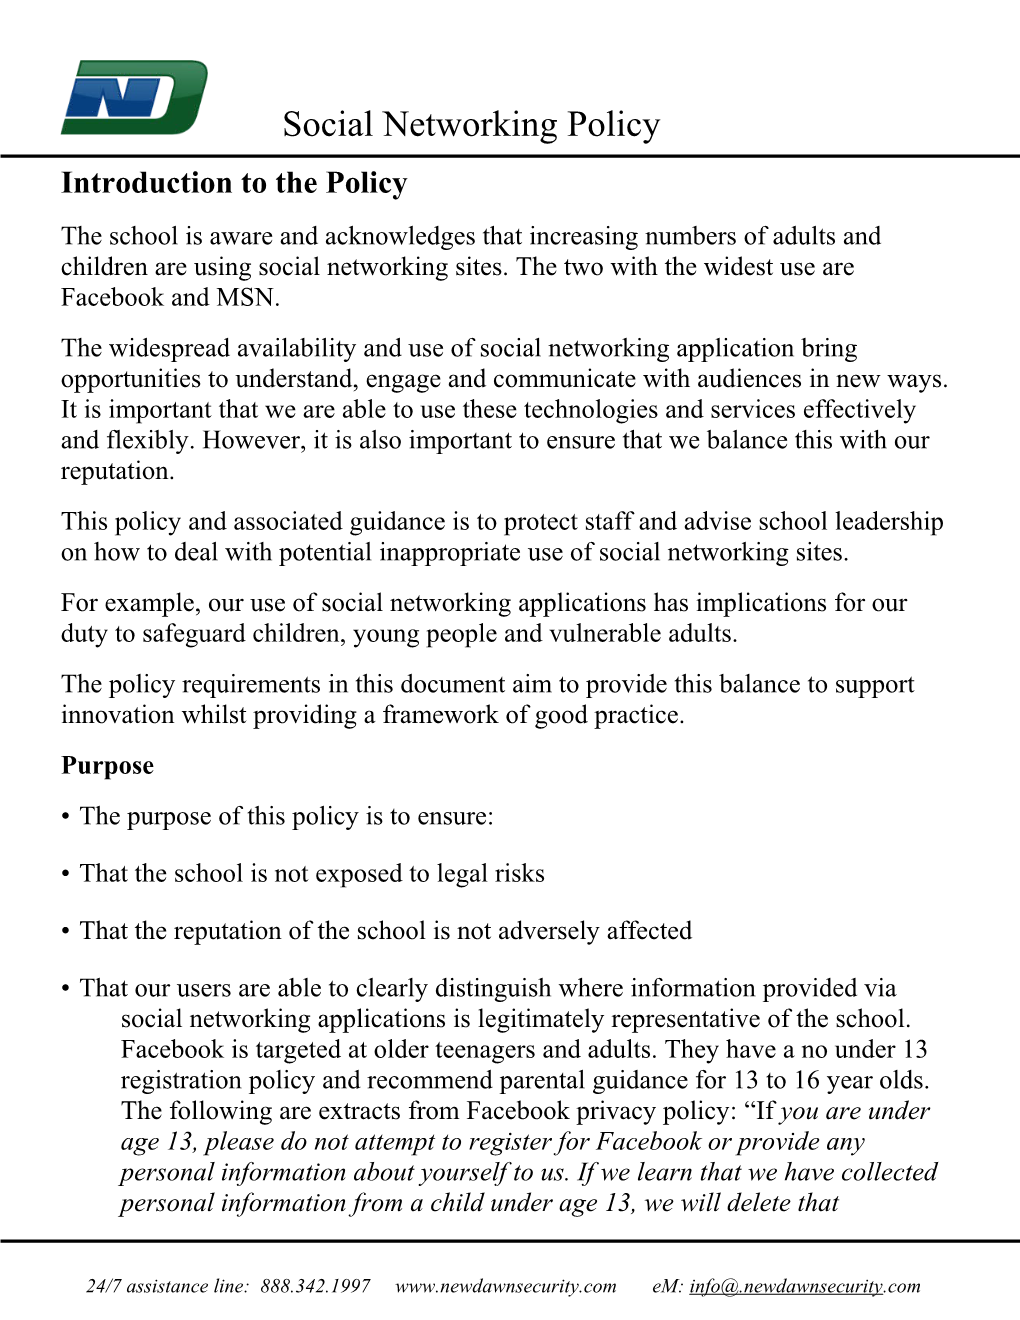 Introduction to the Policy